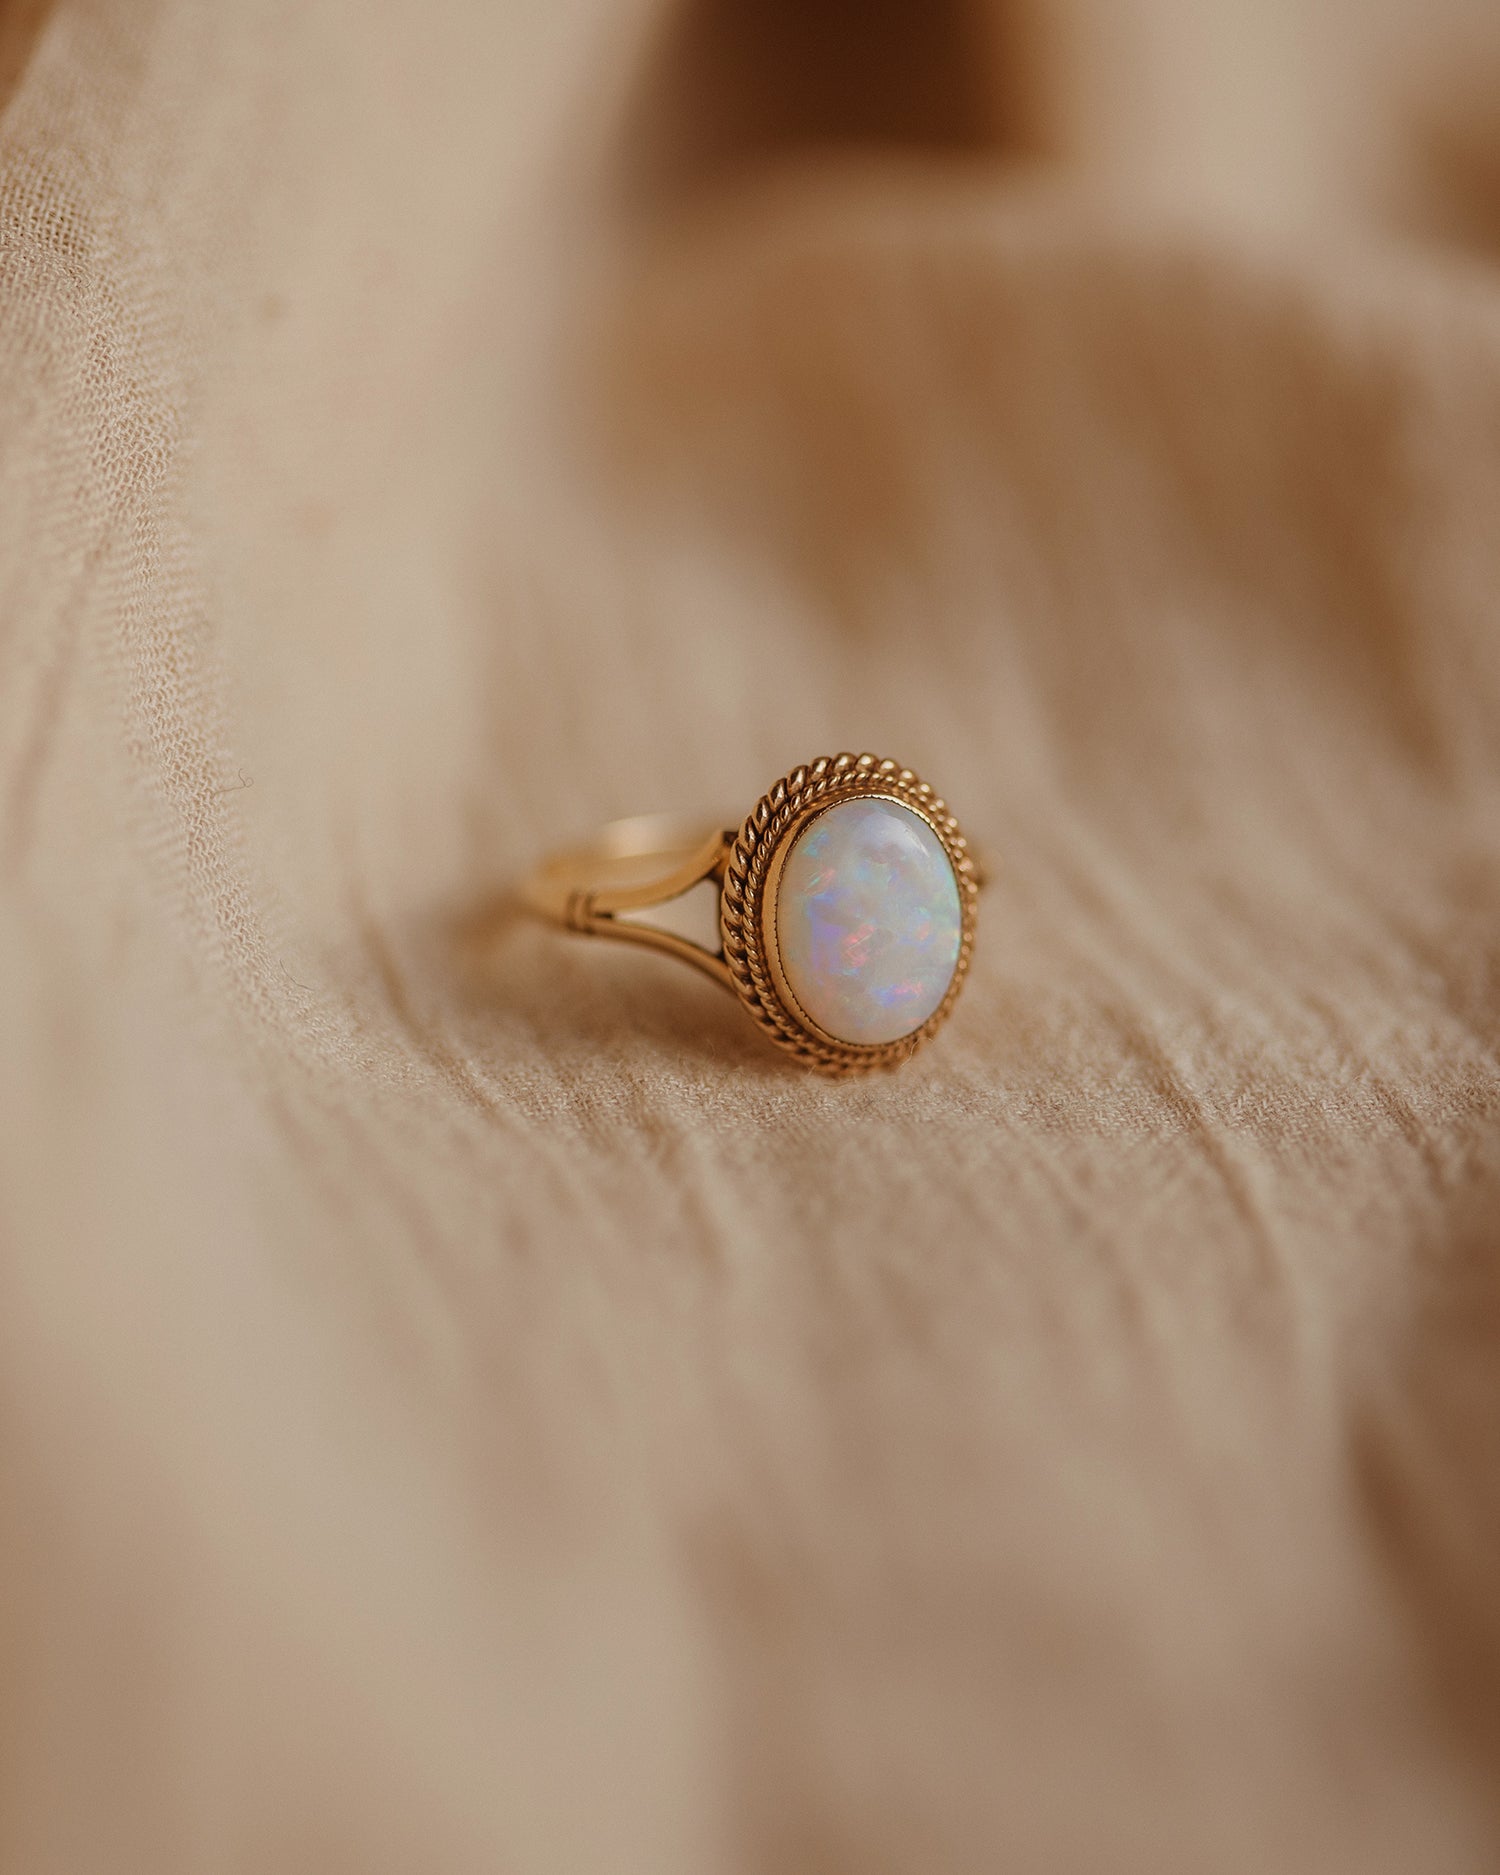 Whinnie 1986 9ct Gold Opal Ring